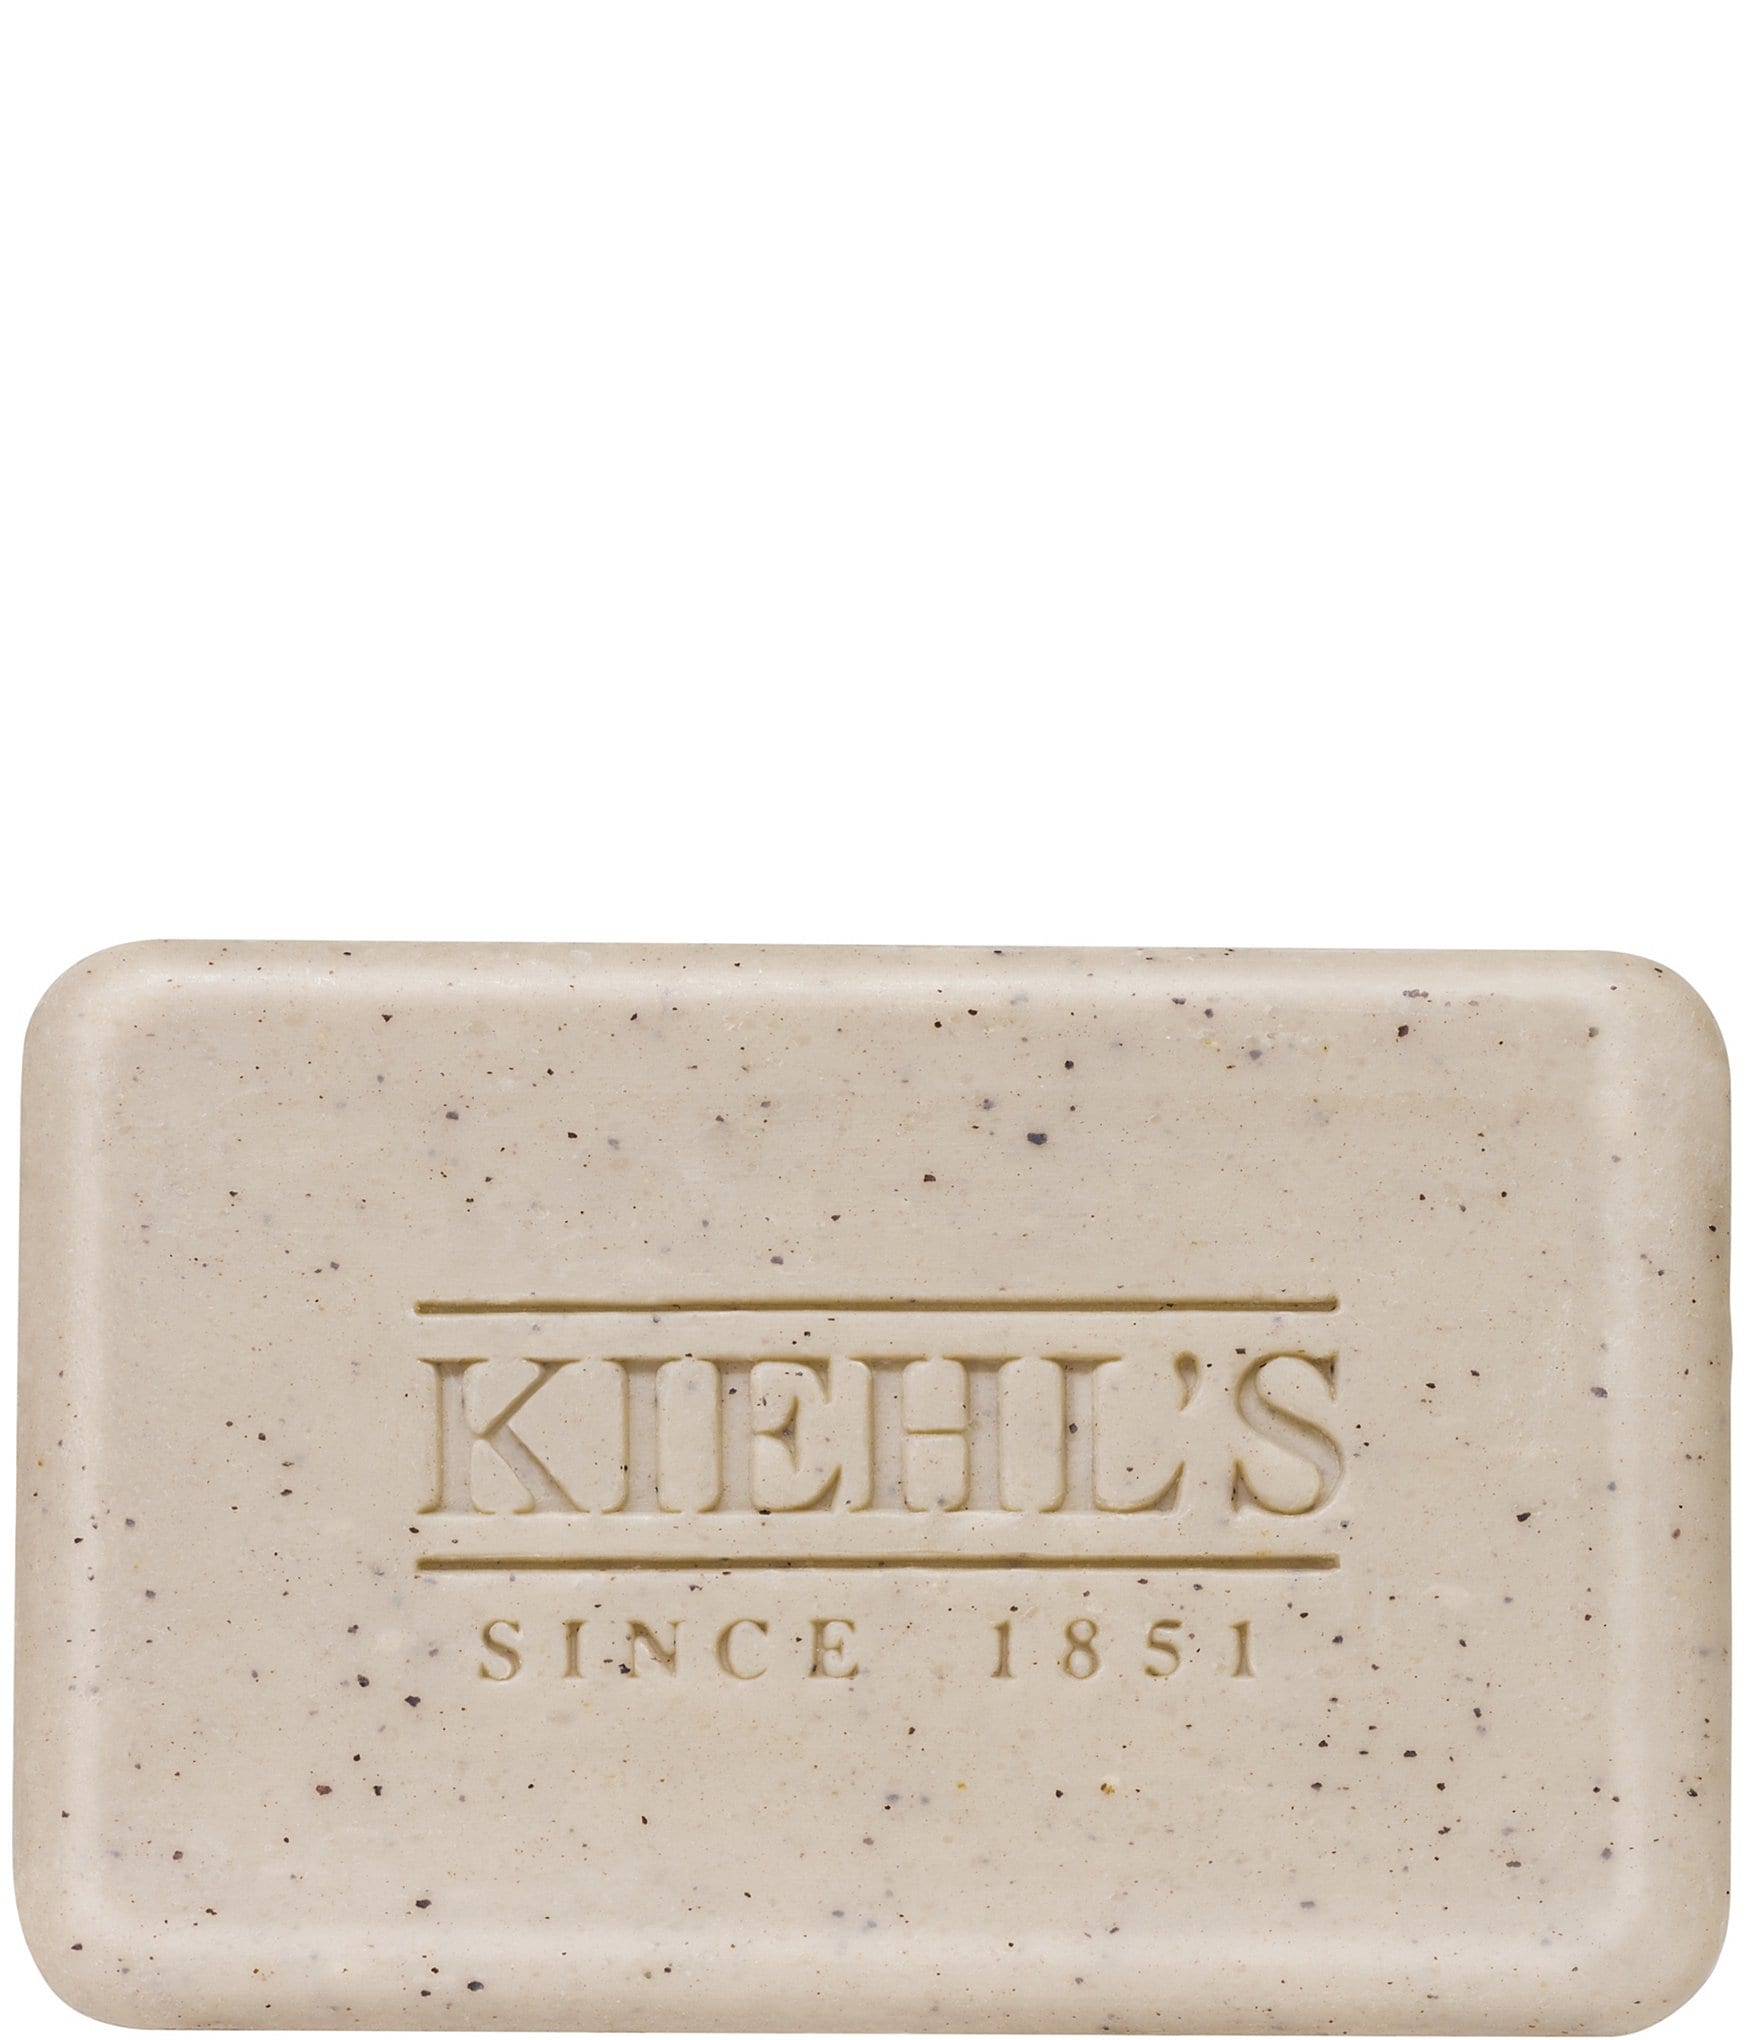 Kiehl's Since 1851 Grooming Solutions Bar Soap, 7 oz.